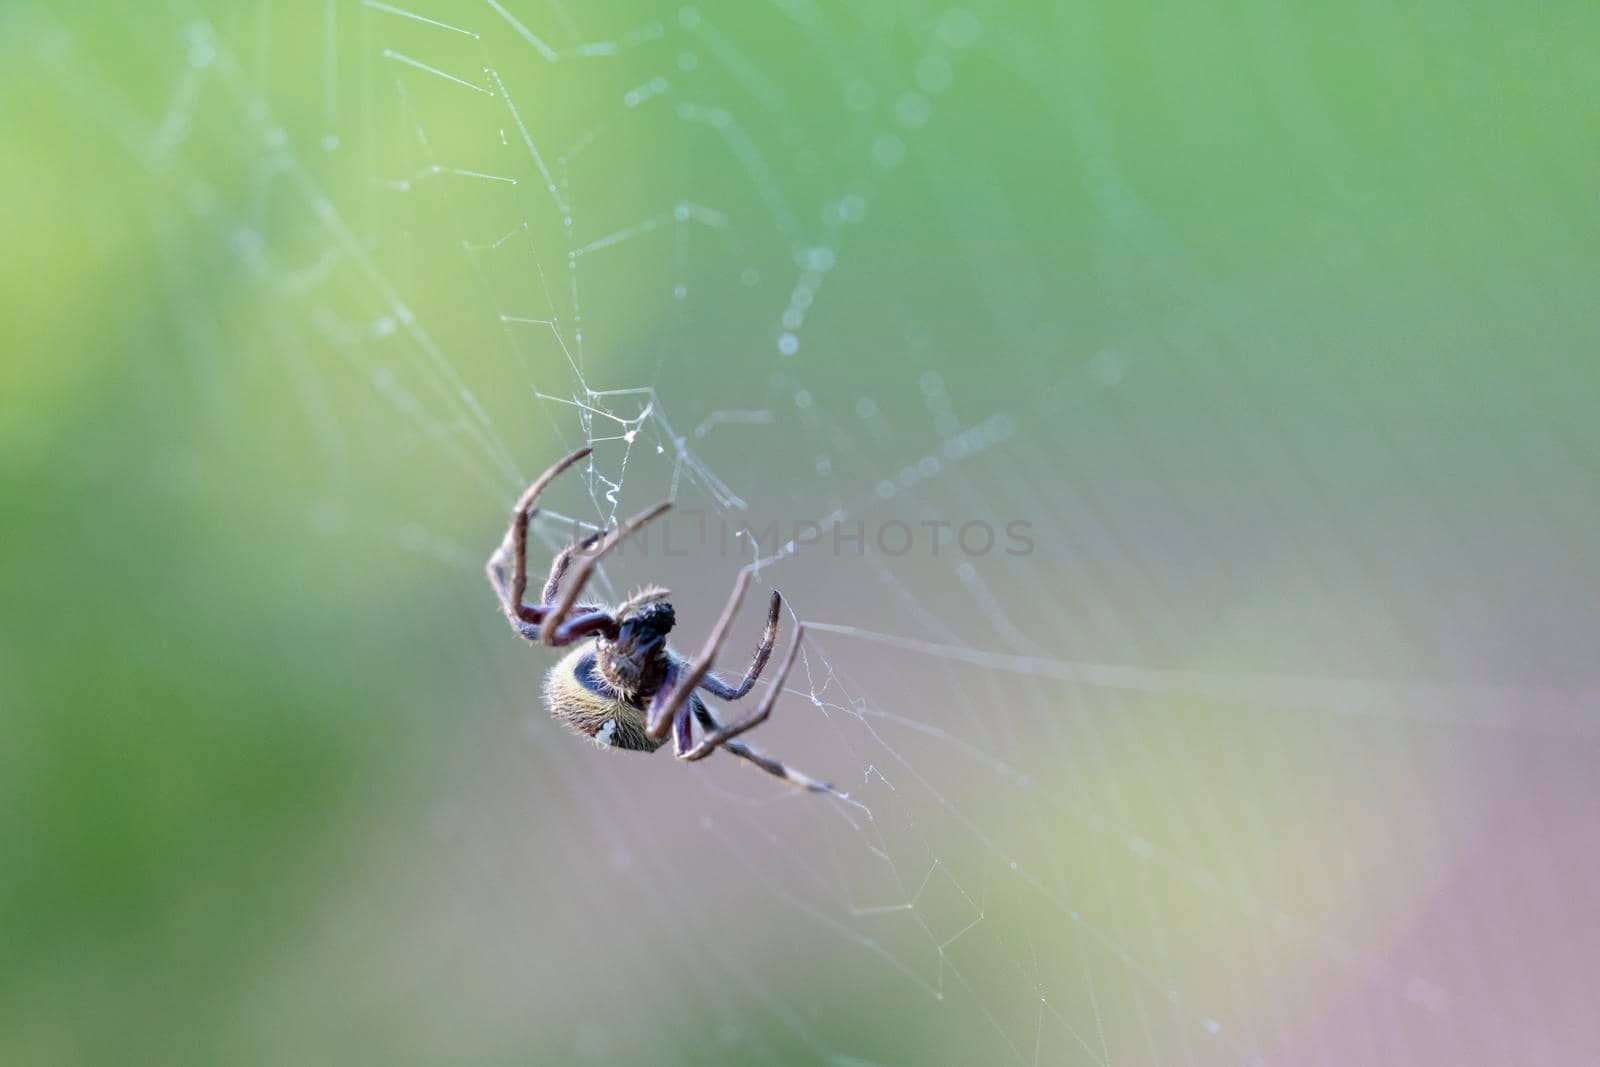 A large brown spider walking in a spider web in a garden by WittkePhotos